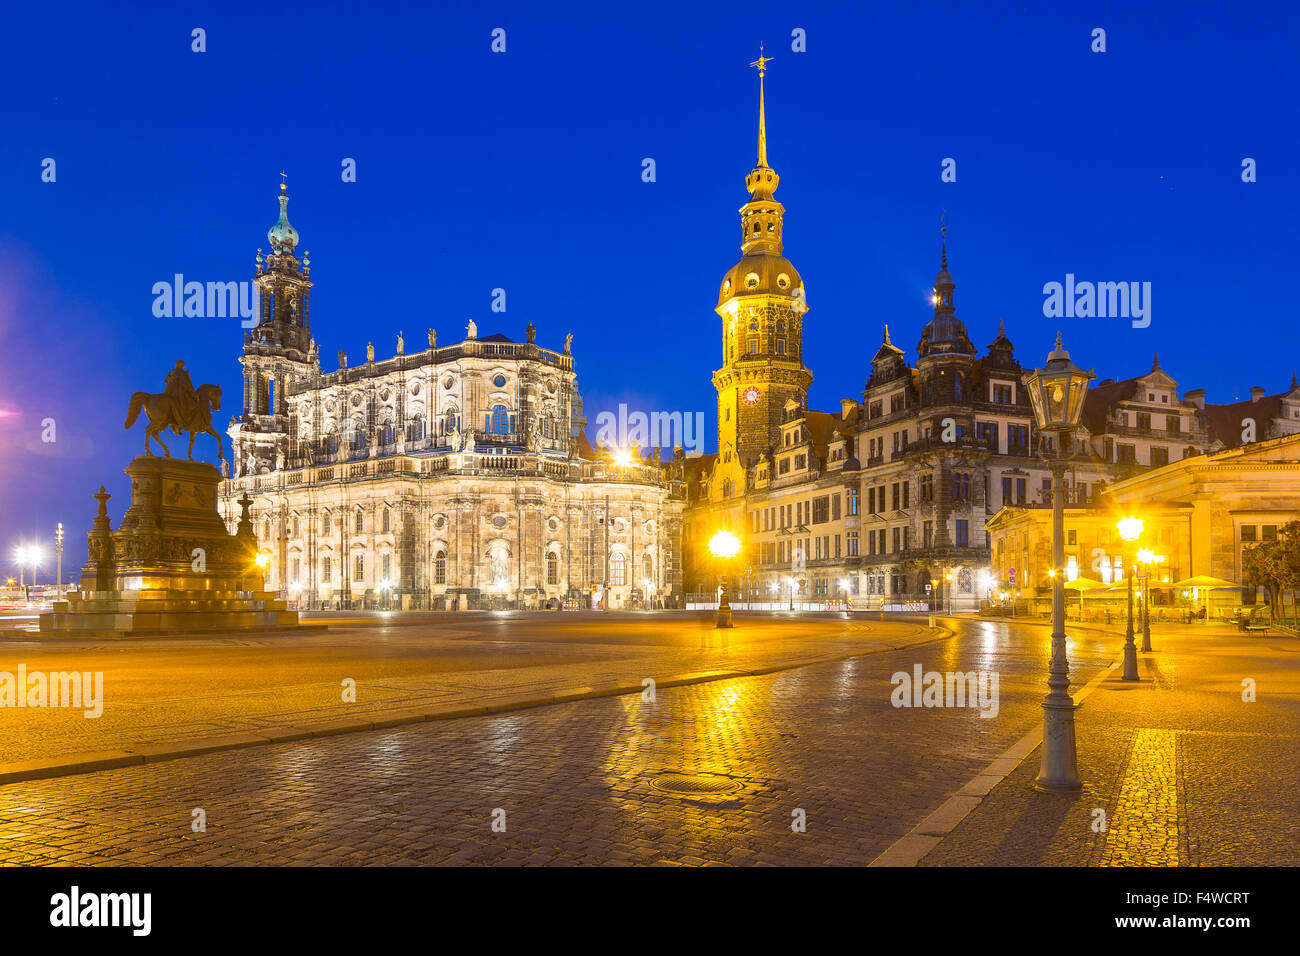 Theaterplatz, theatre square with equestrian monument, Hofkirche church, castle with Hausmannsturm tower and Schinkelwache, dusk Stock Photo